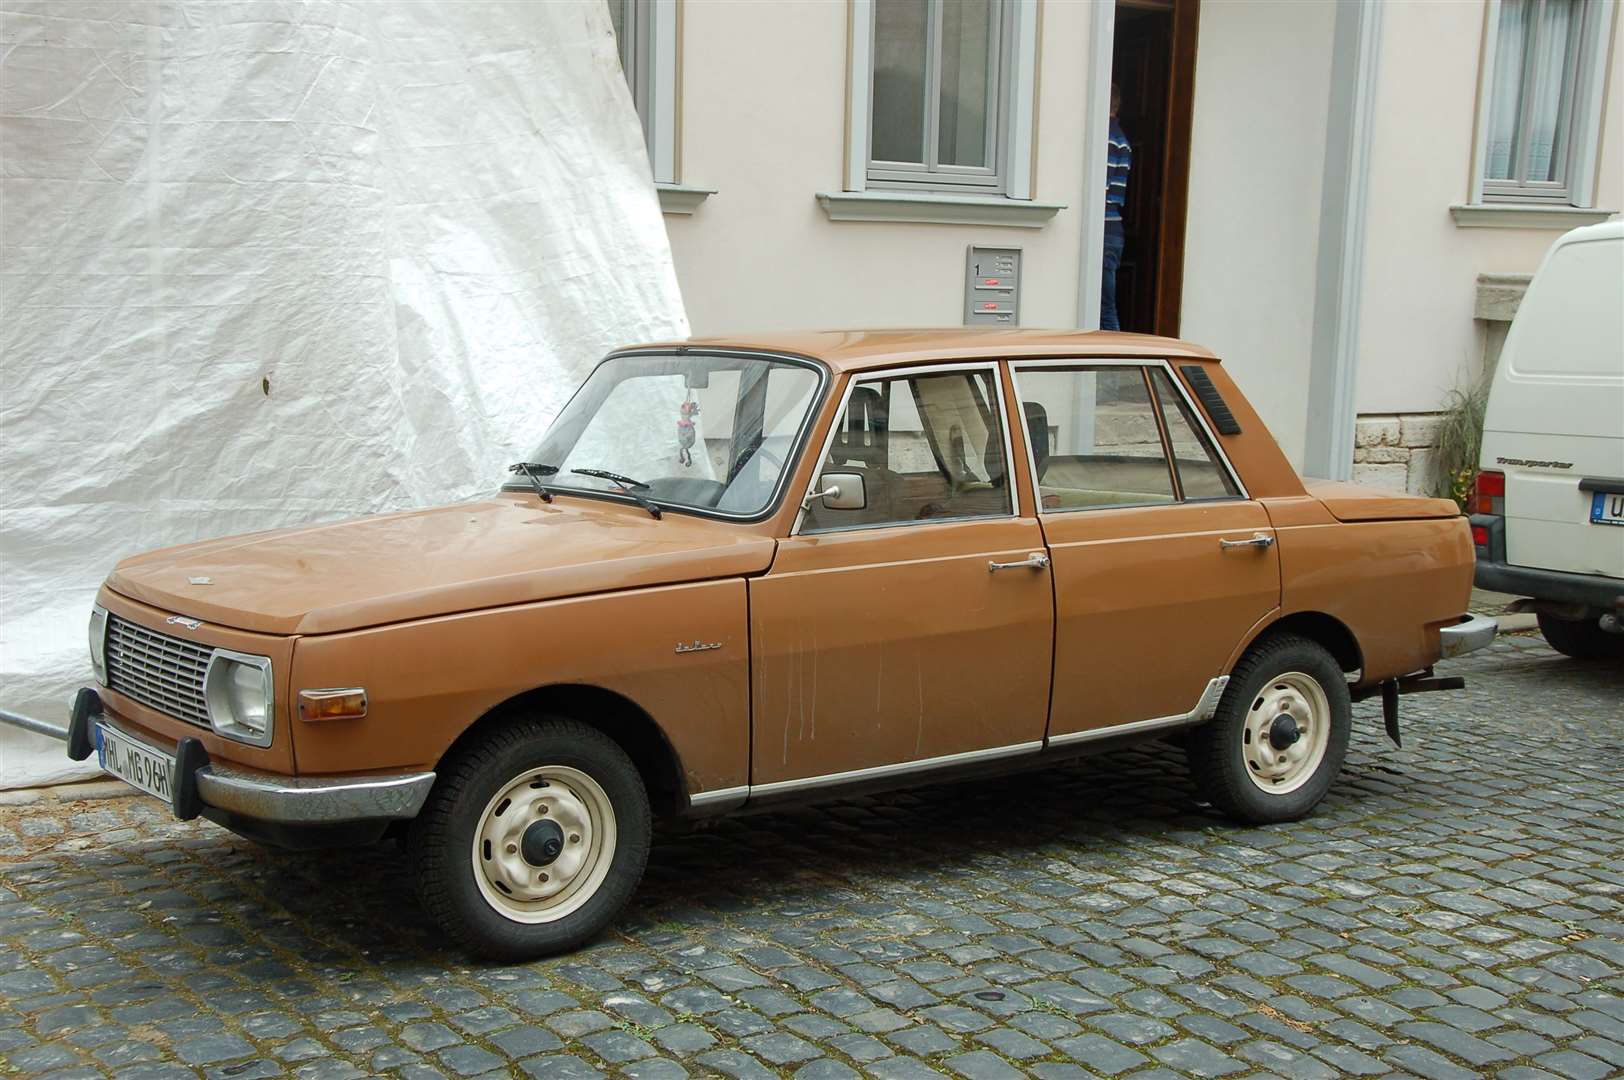 A well cared for Wartburg car in Muhlhausen.